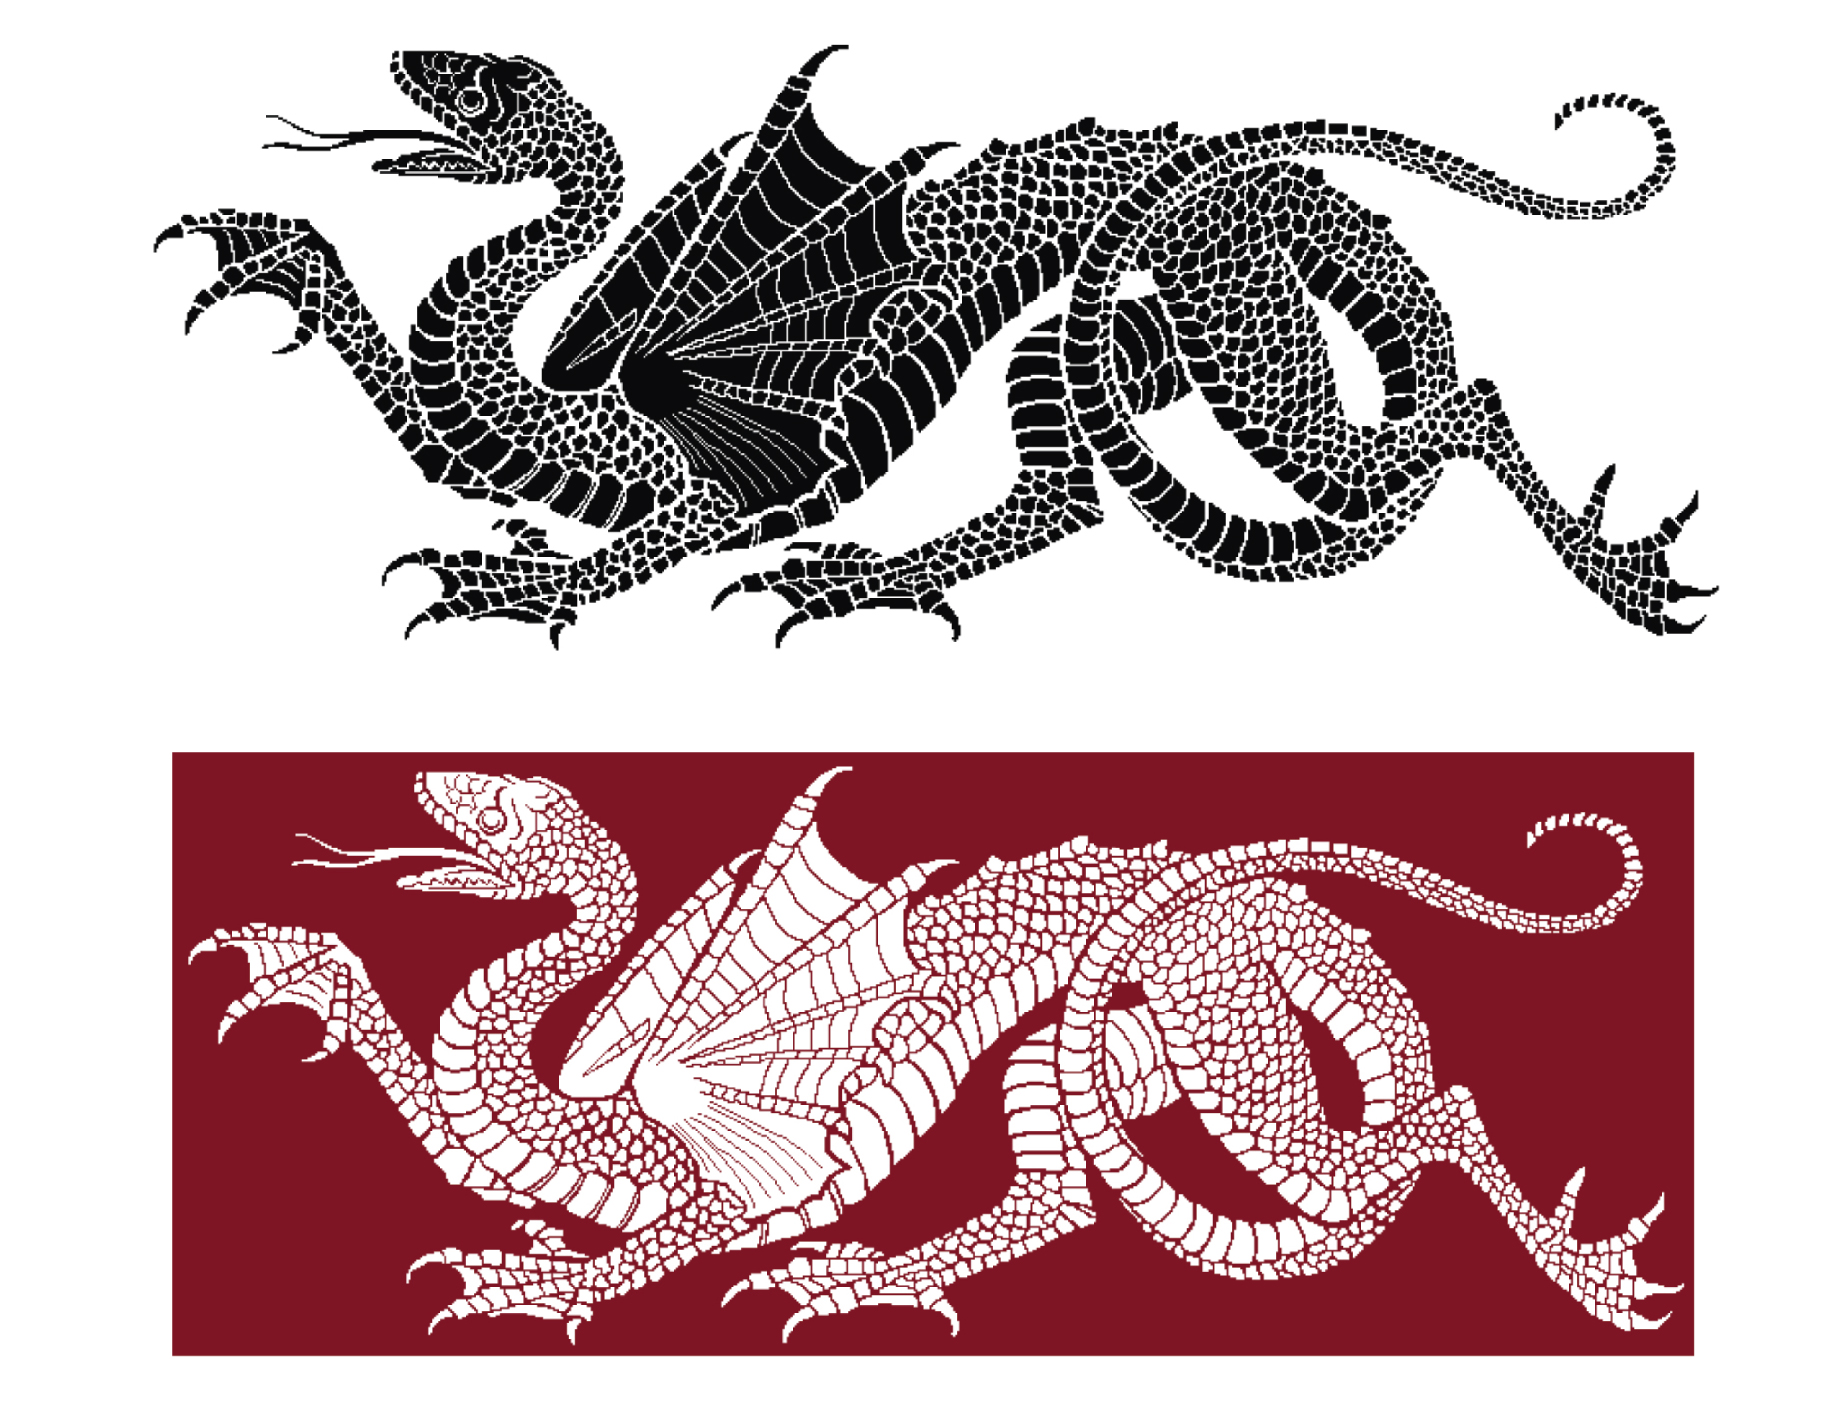 Heraldic Dragon counted cross stitch pattern - extra previews